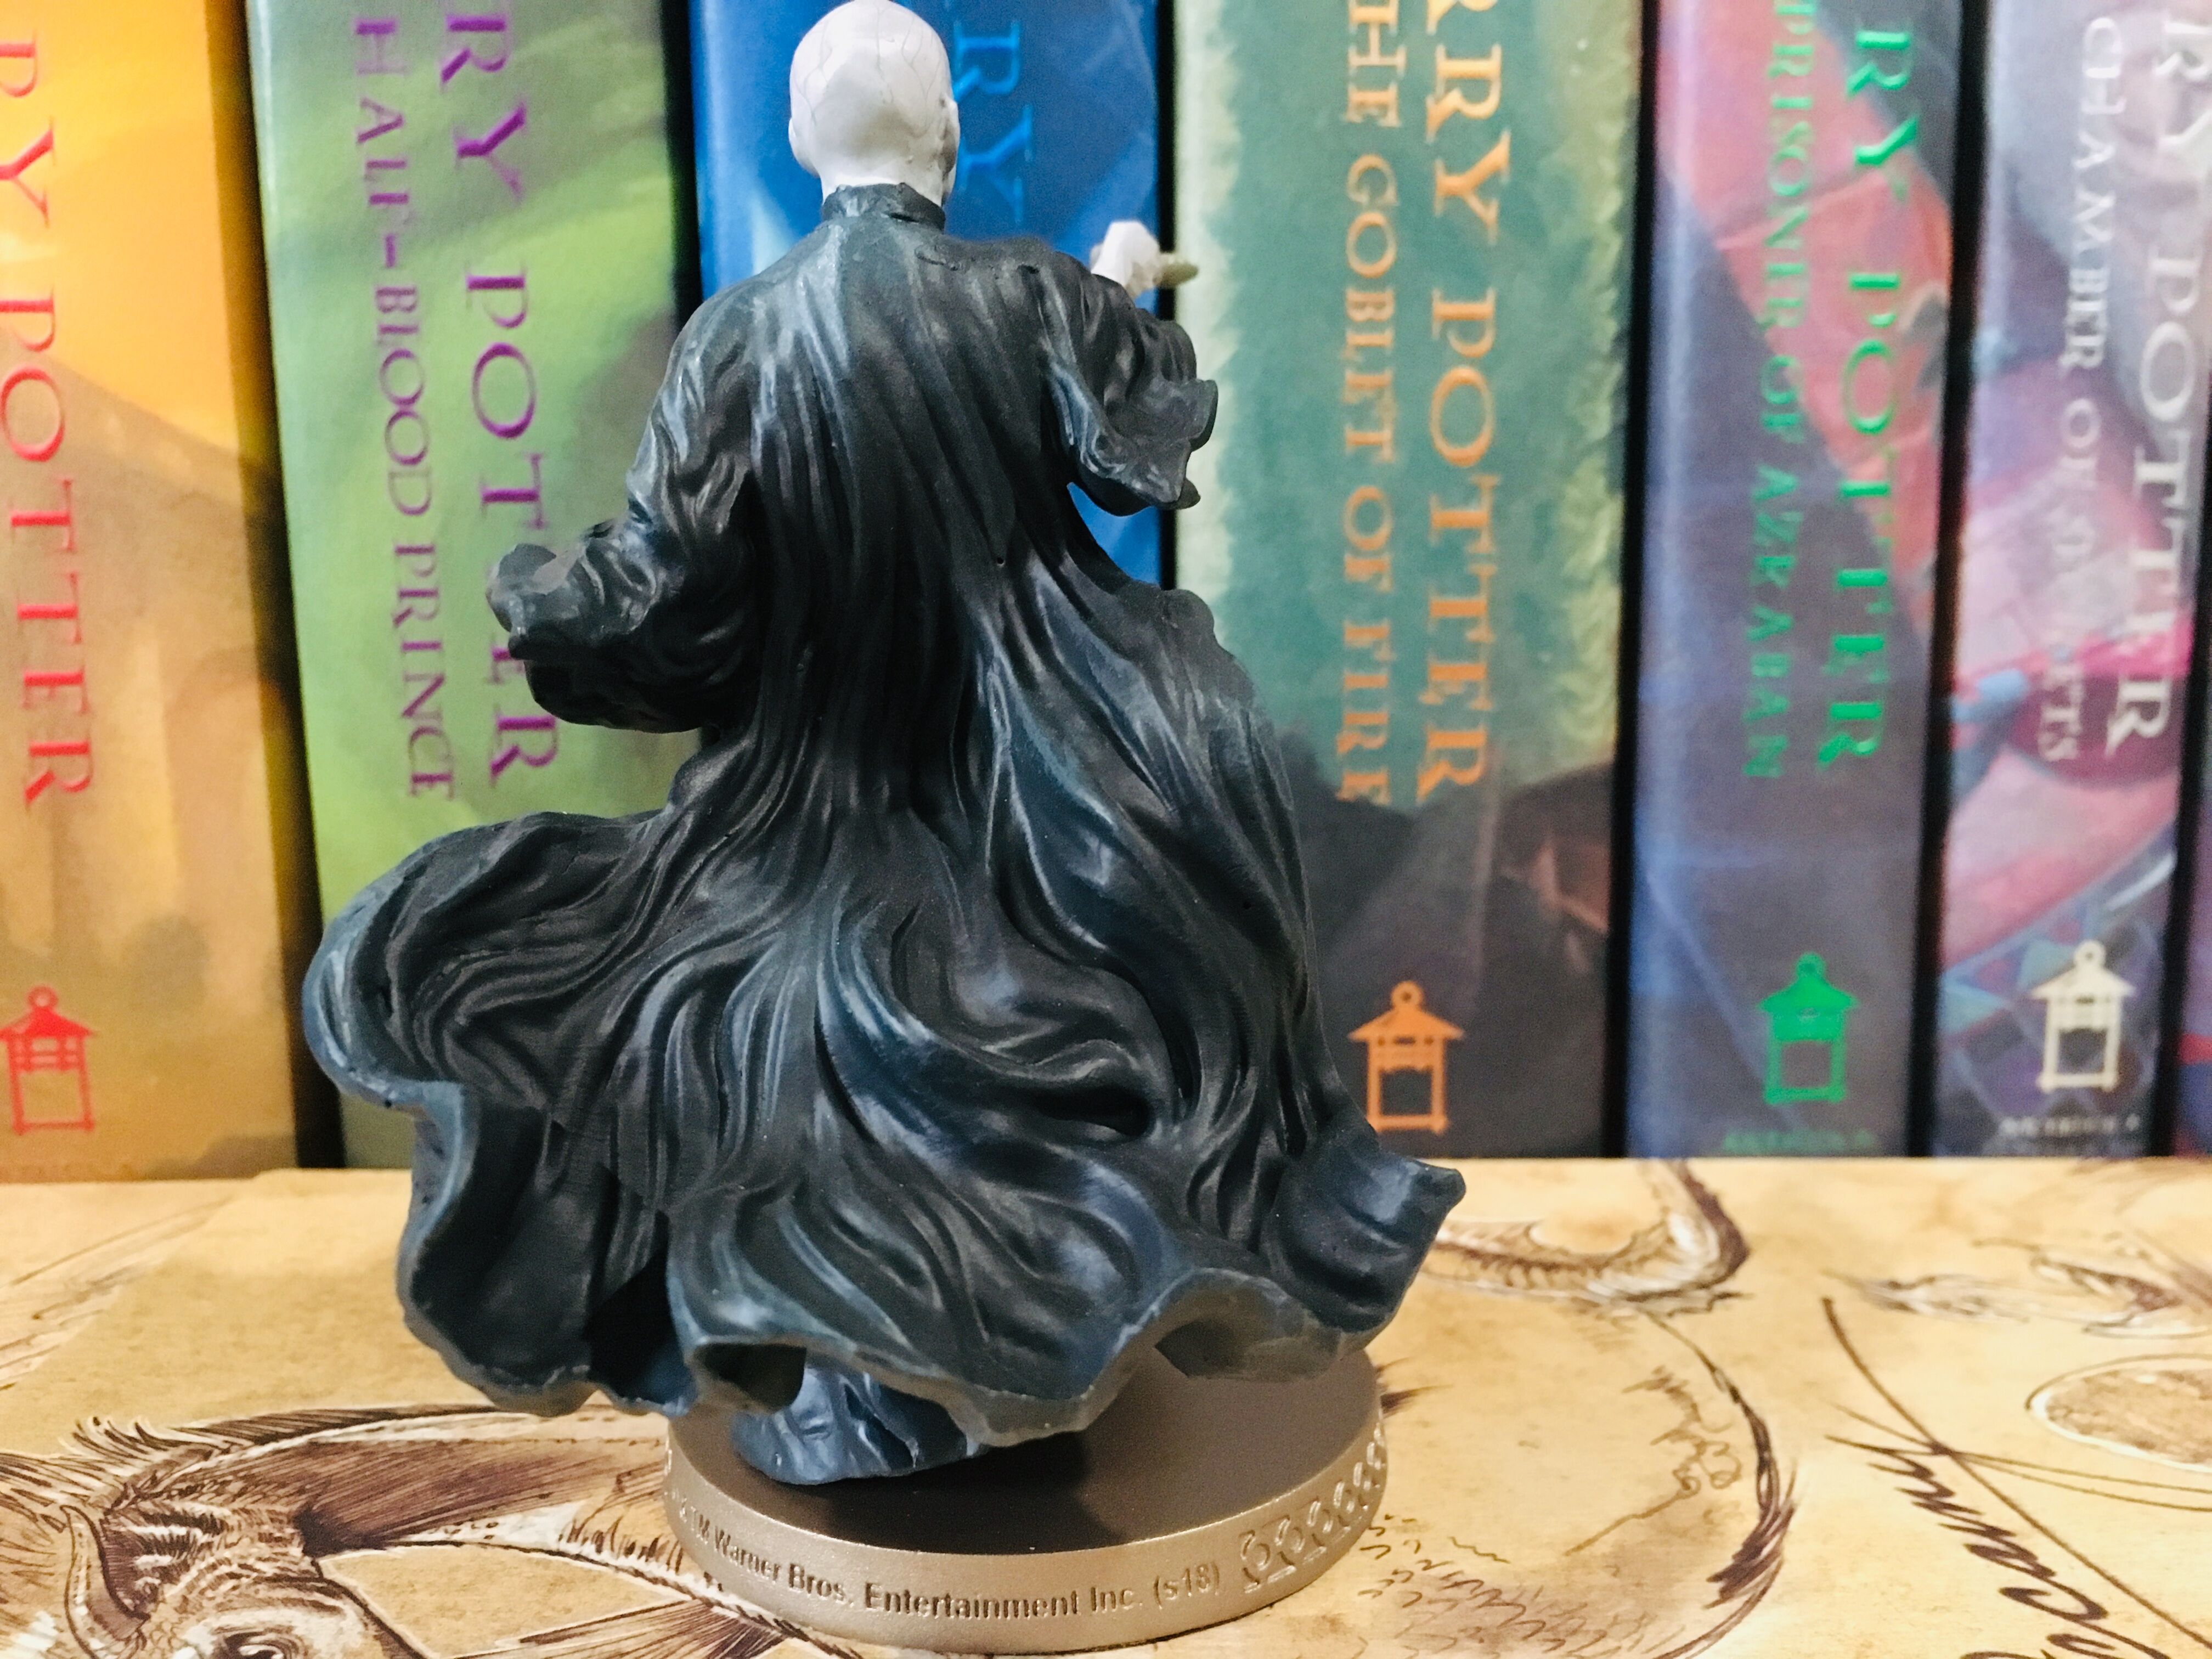 From the back, Voldemort’s billowing cloak is outlined in stunning detail.